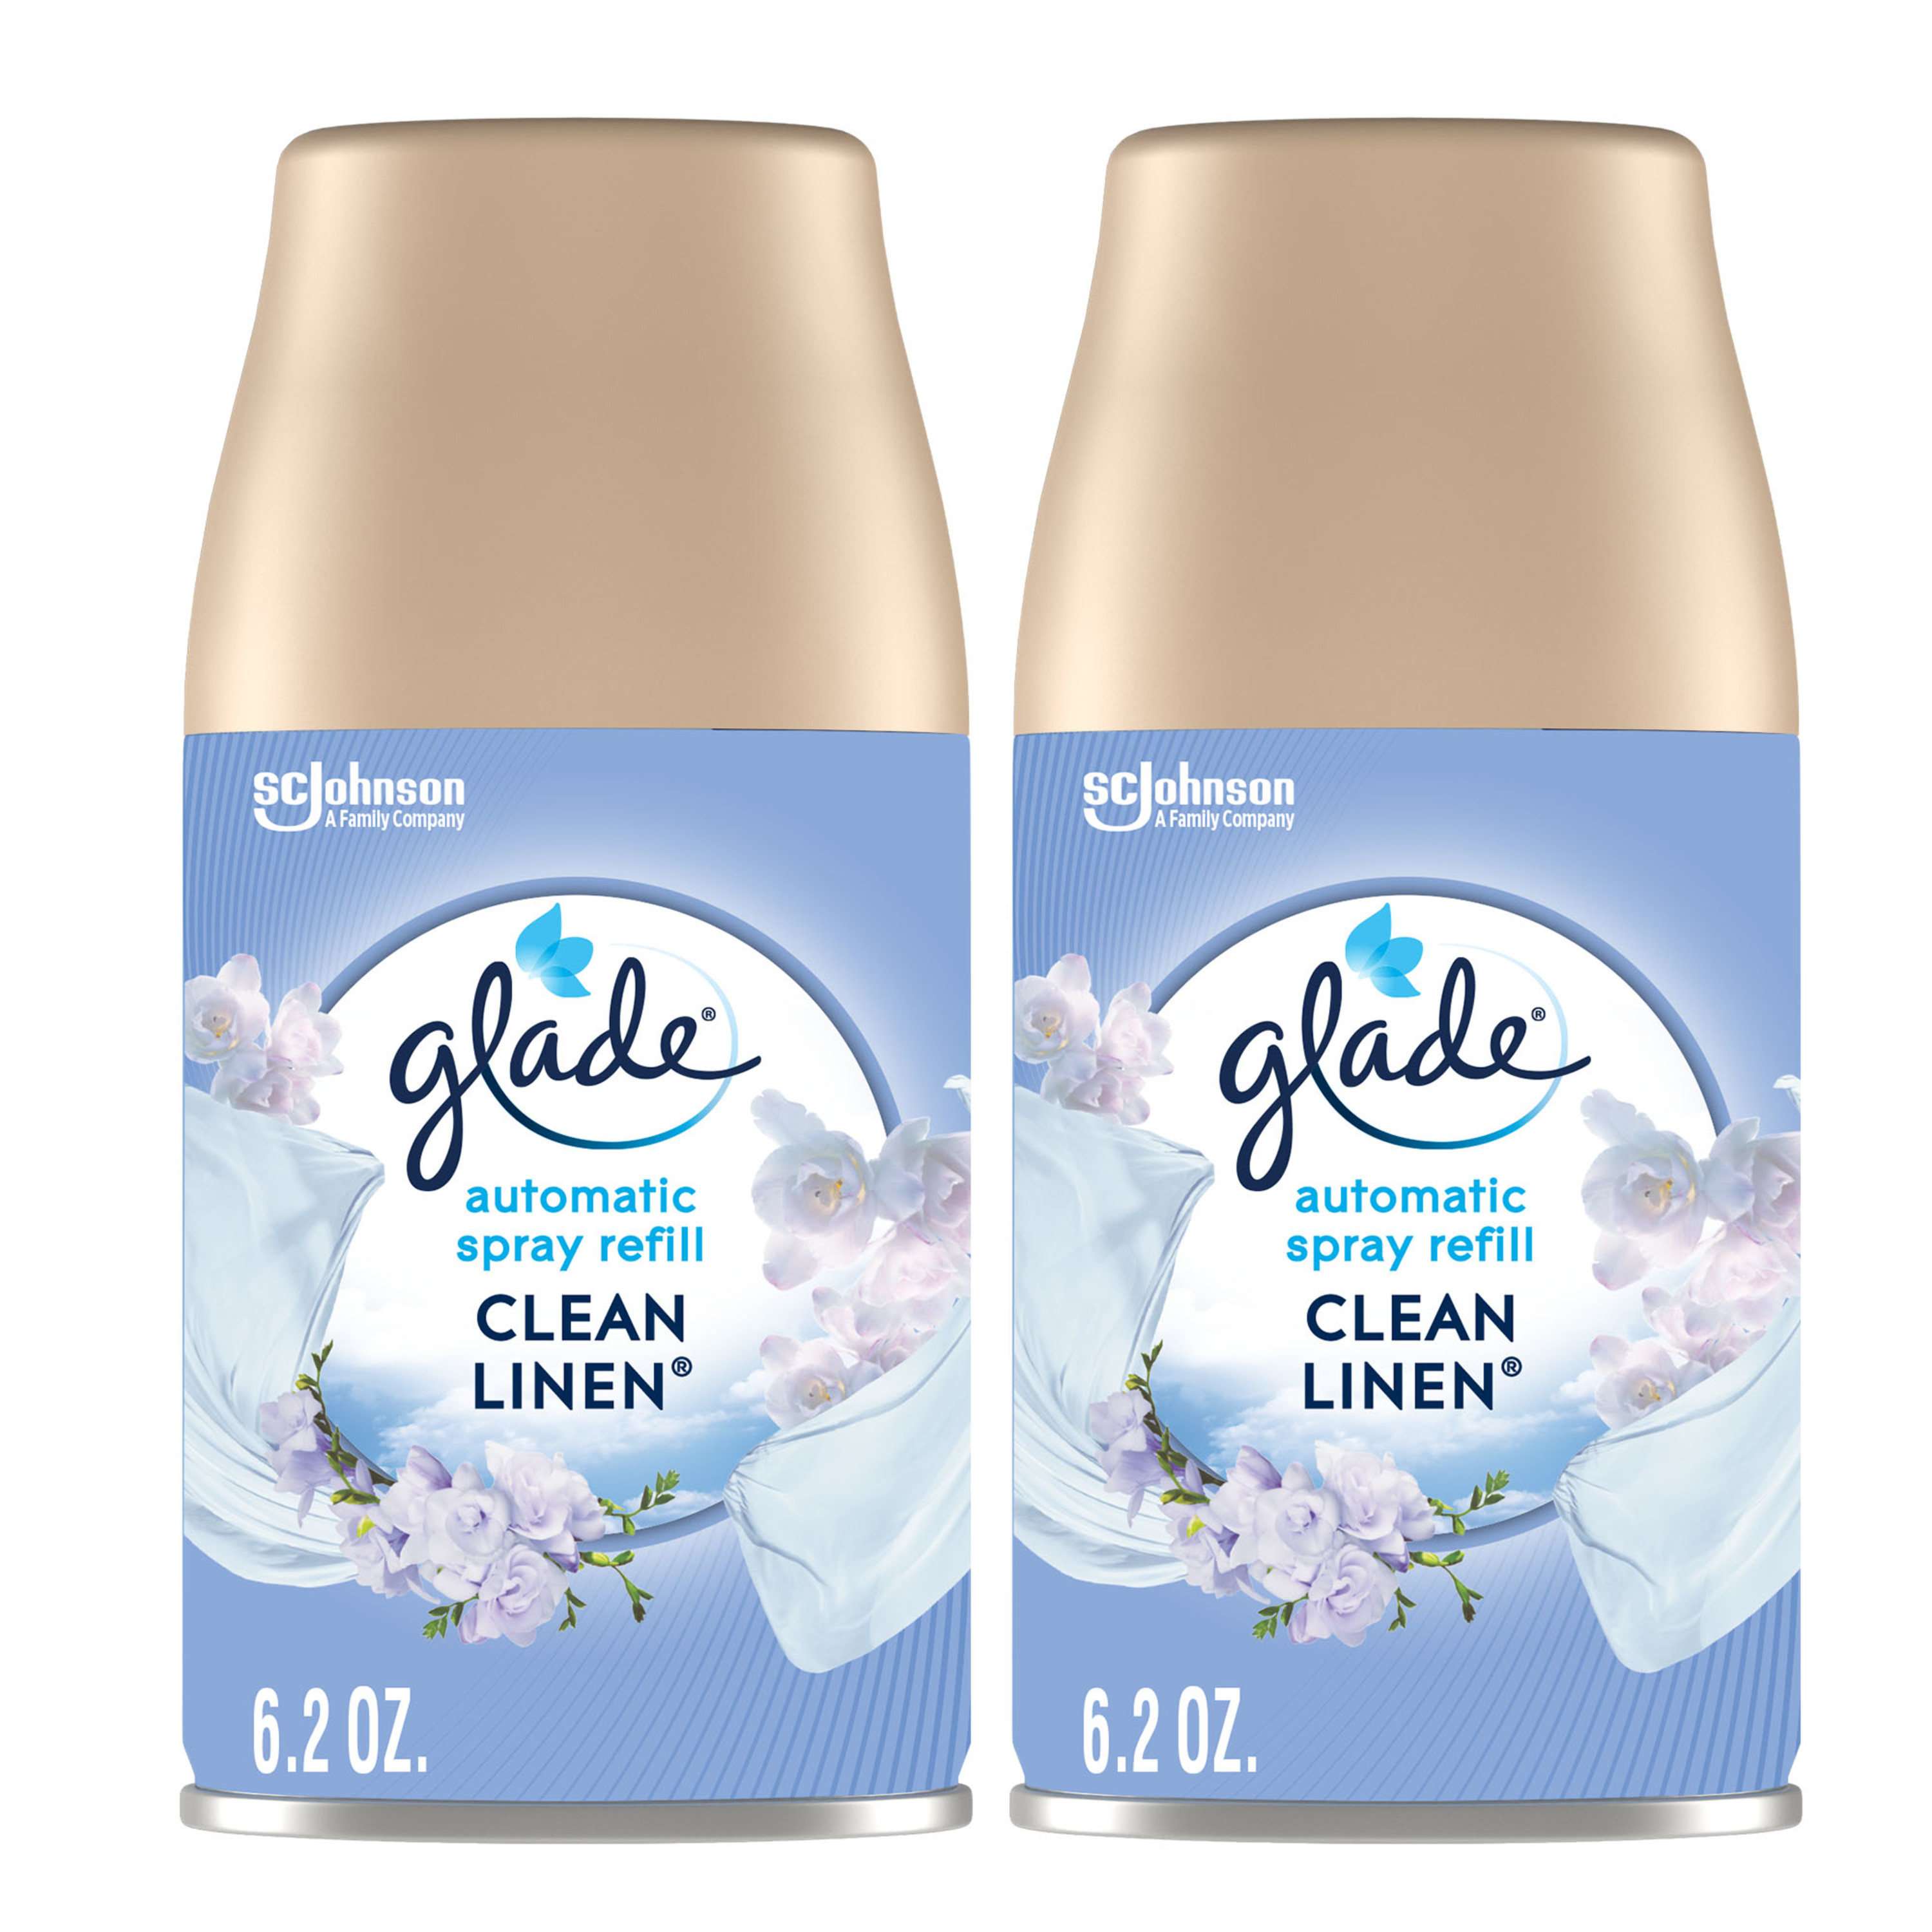 Glade Automatic Spray Refills, Air Freshener, Mothers Day Gifts, Infused with Essential Oils, Clean Linen, 6.2 oz, 2 Count - image 1 of 18